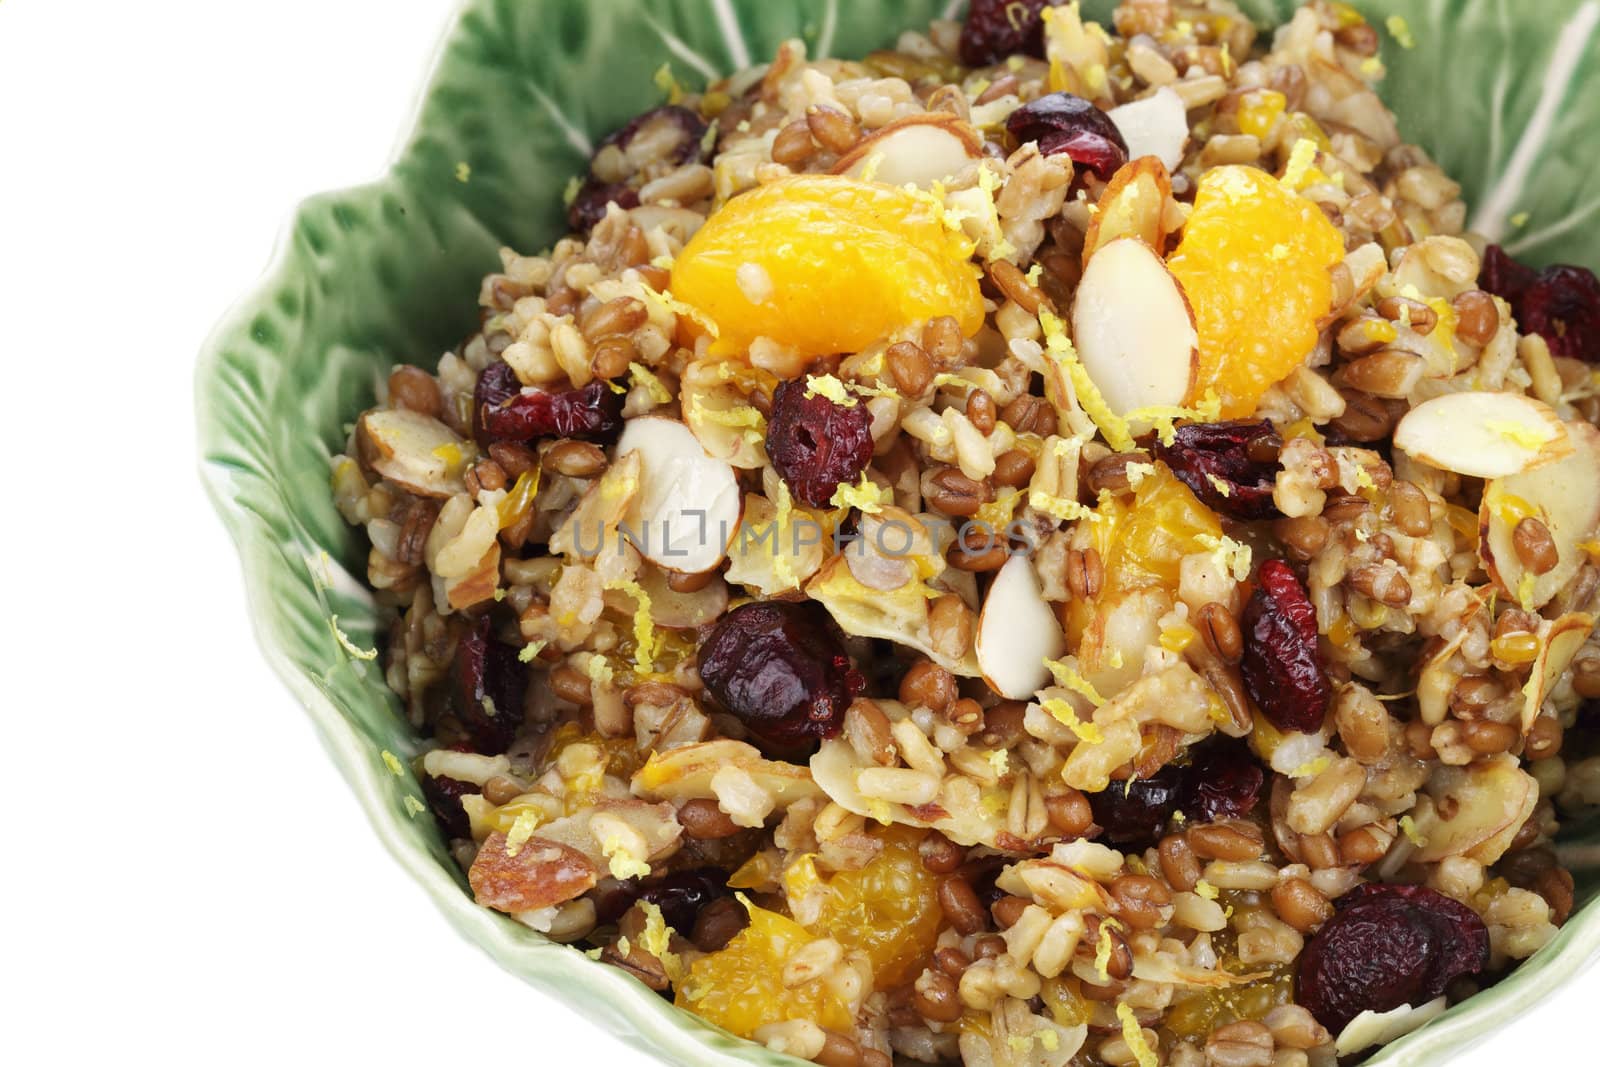 Pilaf with whole grains, nuts, and dried fruit for a delicious side dish or breakfast. Clipping path included.